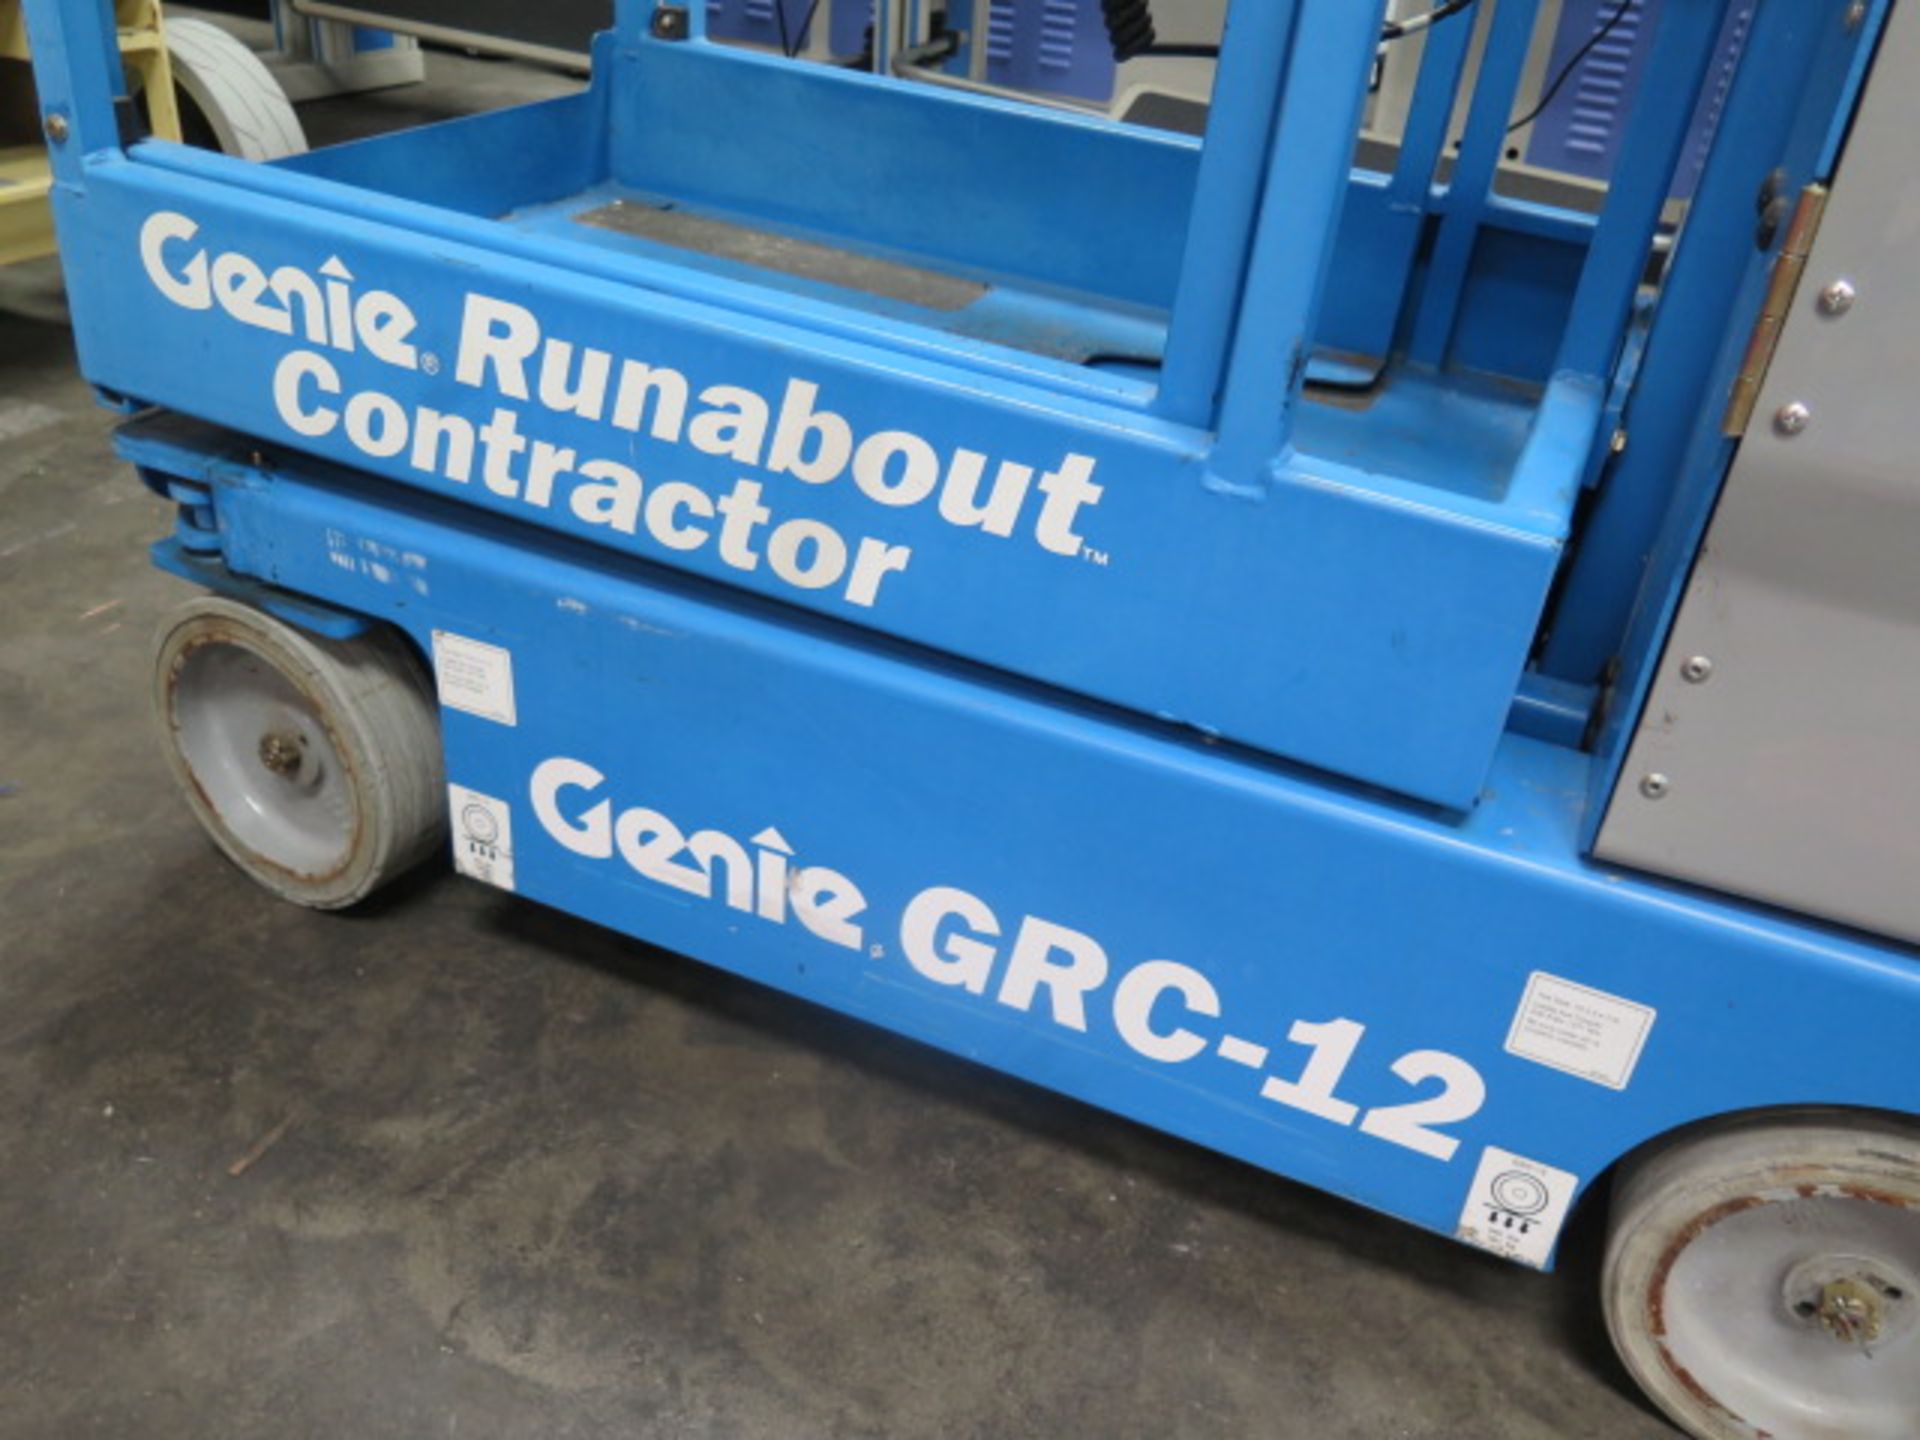 2010 Genie GRC-12 "Runabout Contractor" Electric Platform Lift s/n GRC10-315 w/ 12' Lift, SOLD AS IS - Image 4 of 14